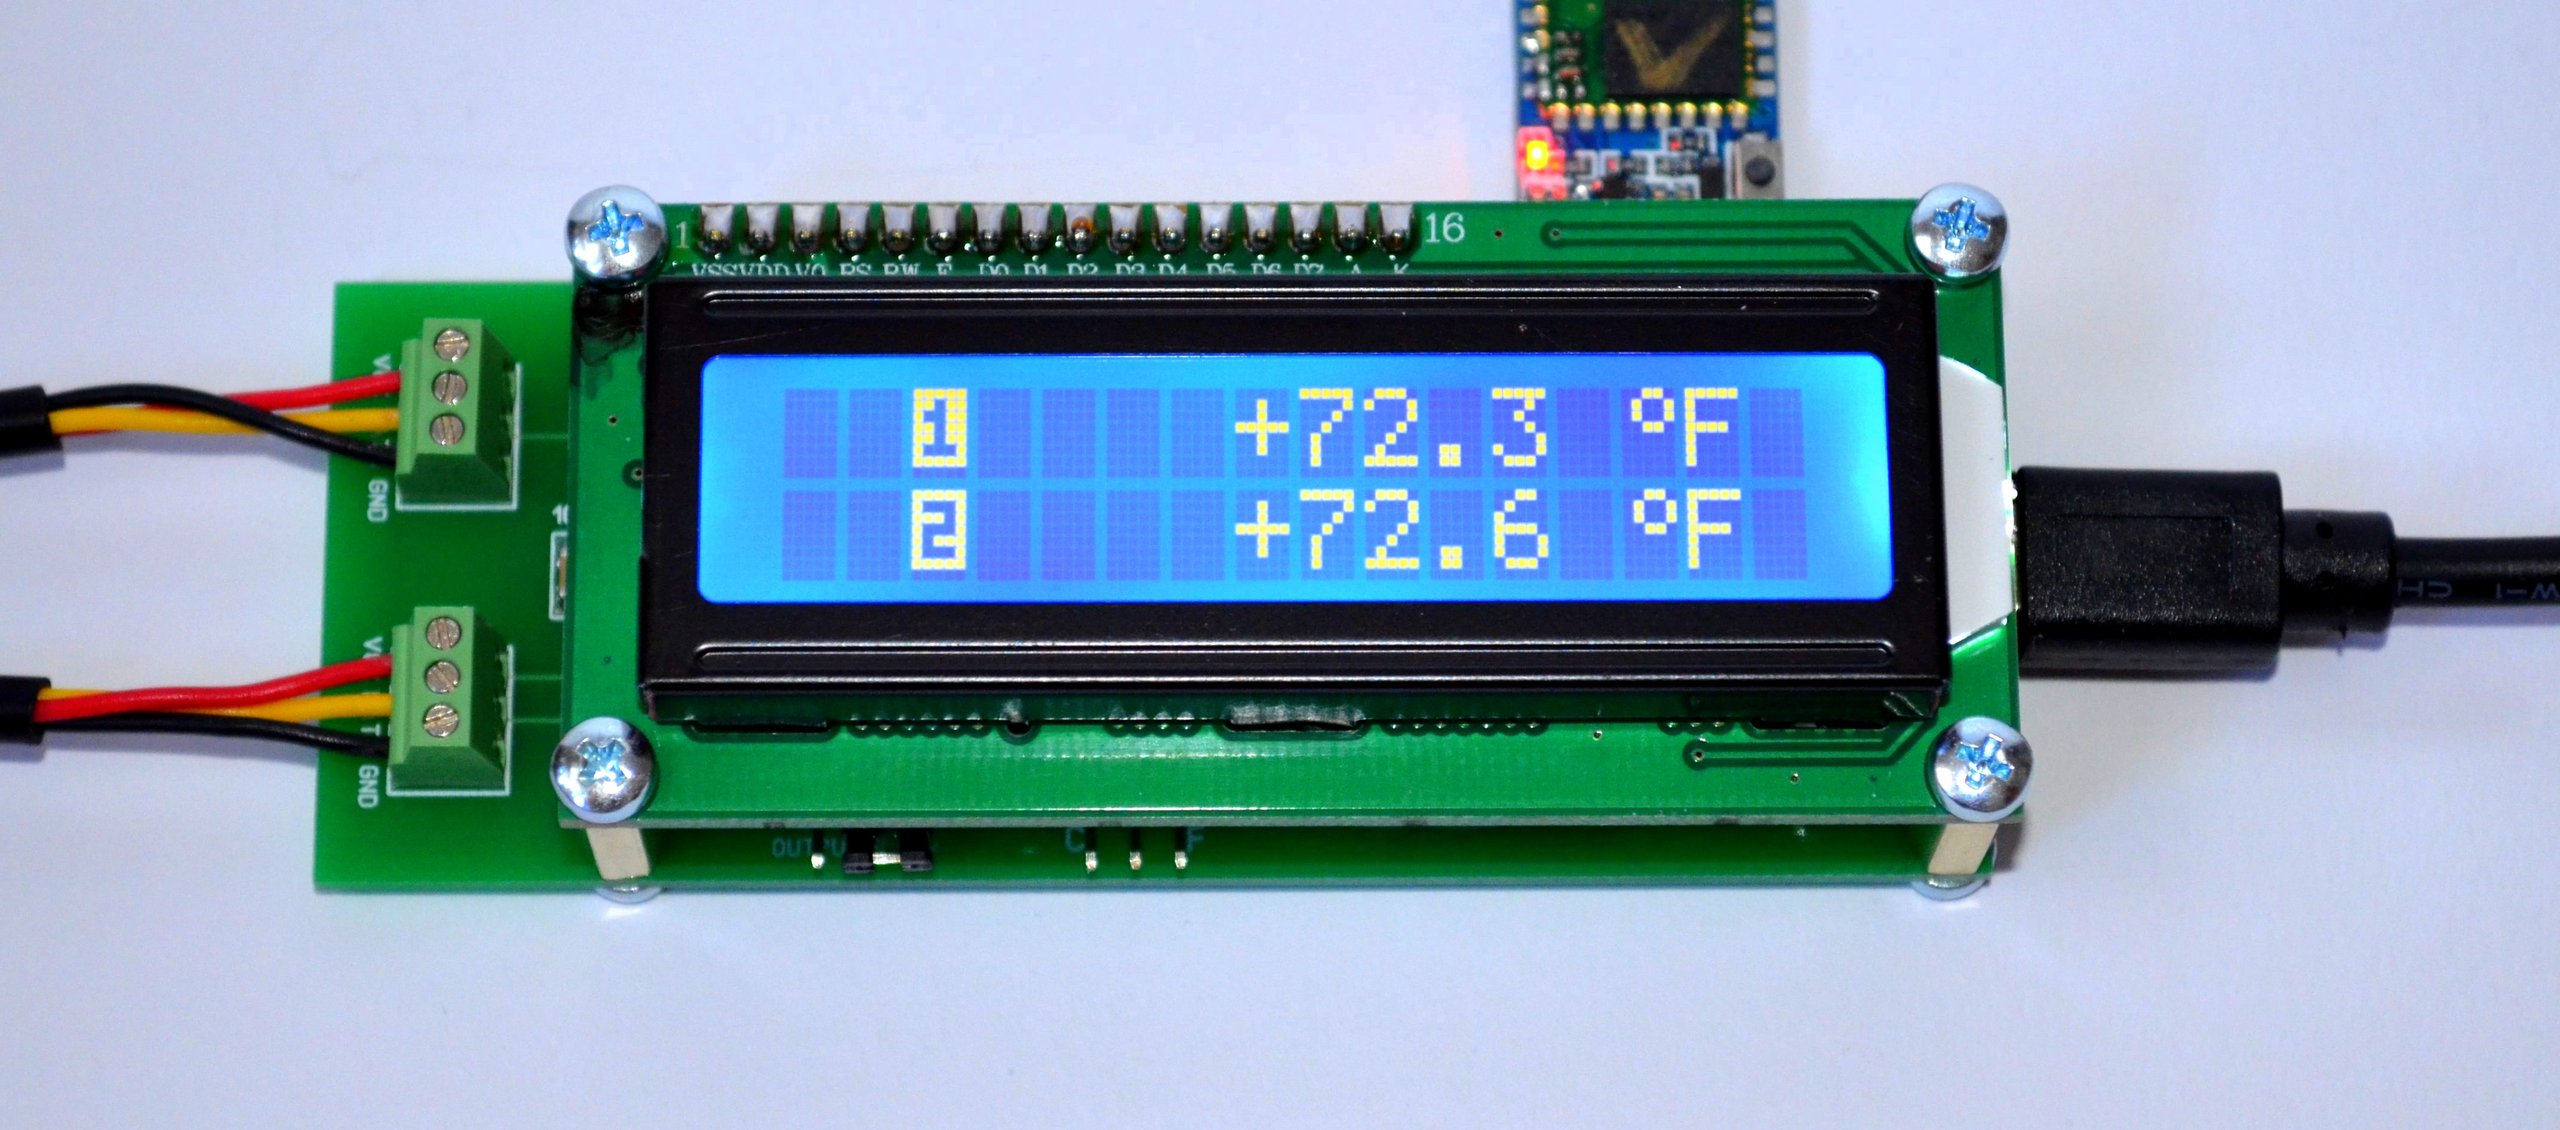 2CH Temperature Data Logger Bluetooth from bugrovs2012 on Tindie